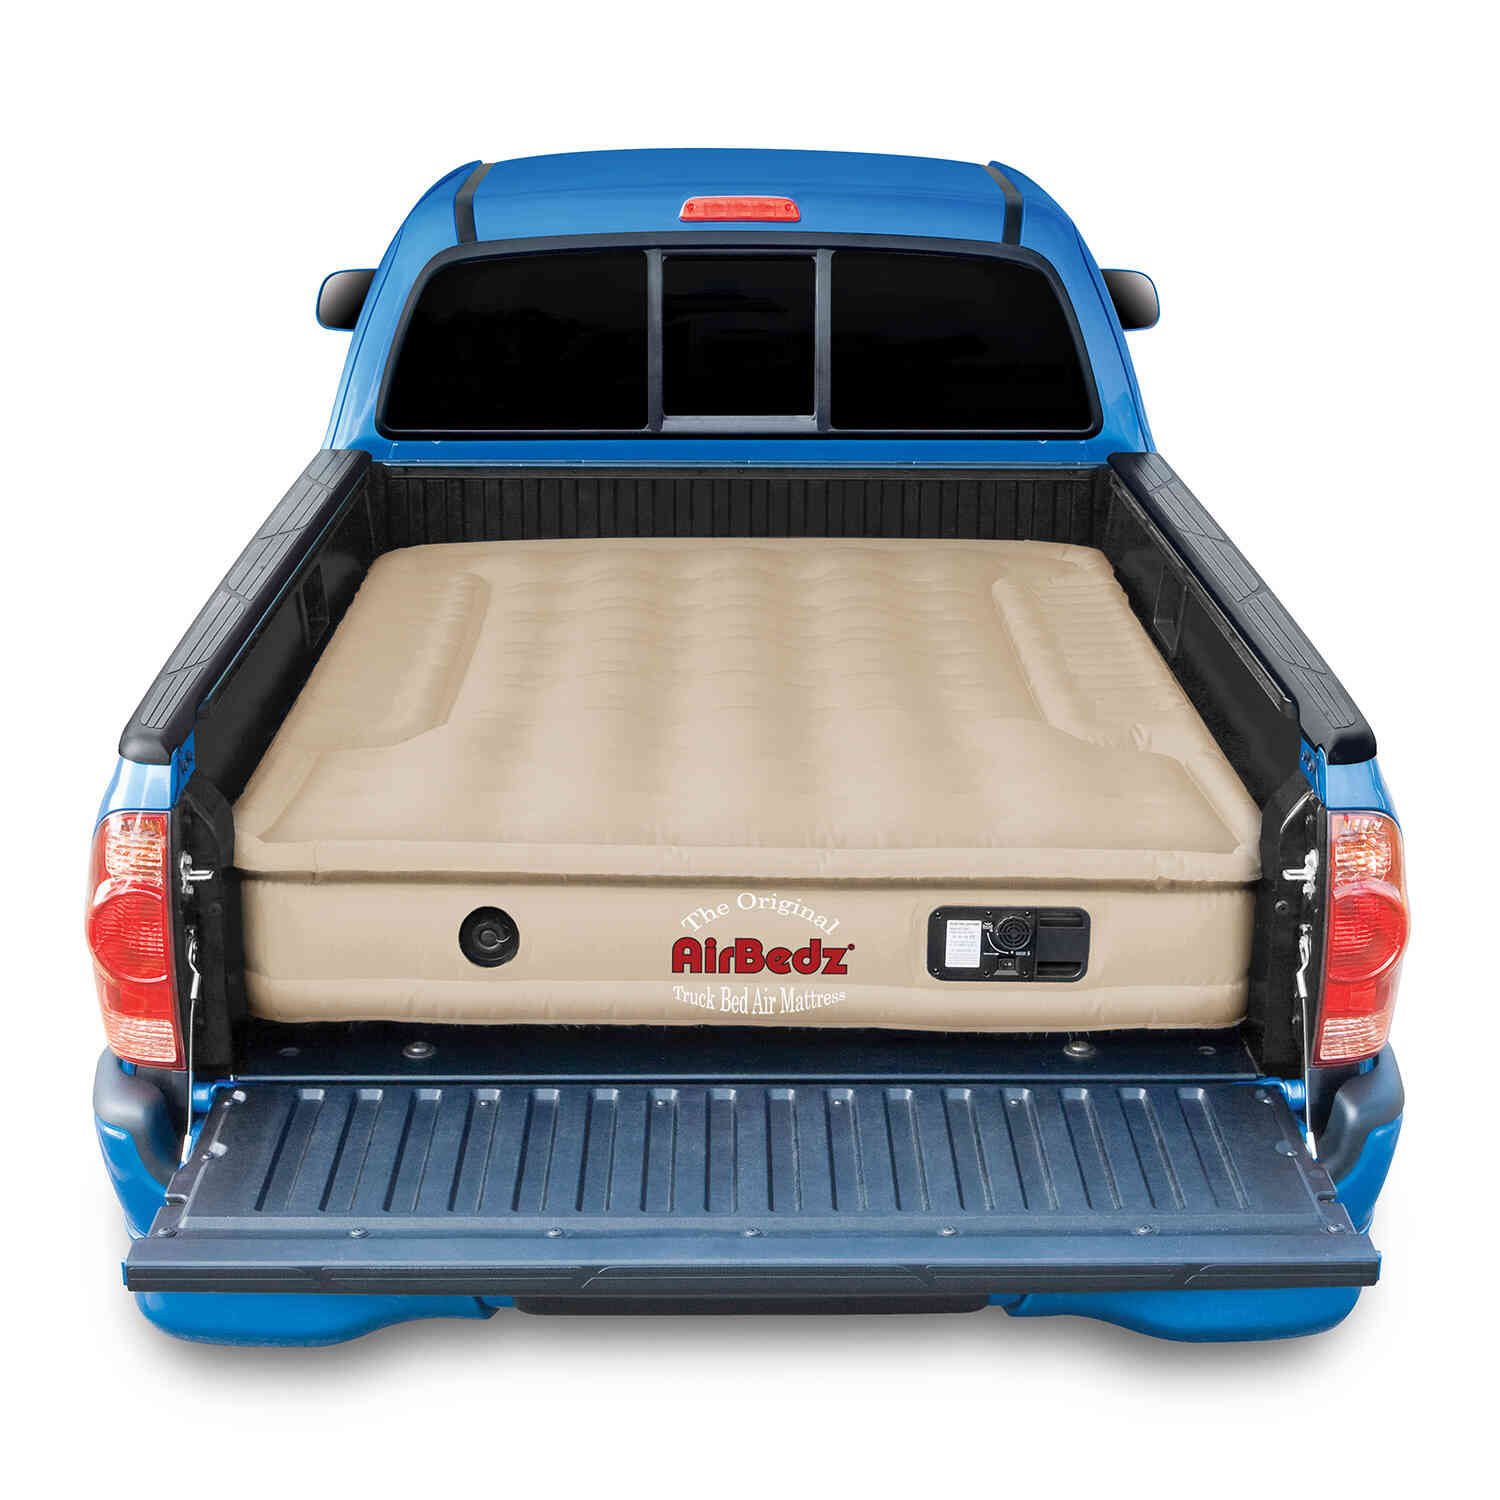 Pittman Outdoors PPI-502 AirBedz TAN Full Size 6 ft. -6.5 ft.  Short Bed w/ Built-in Rechargeable Battery AirPump